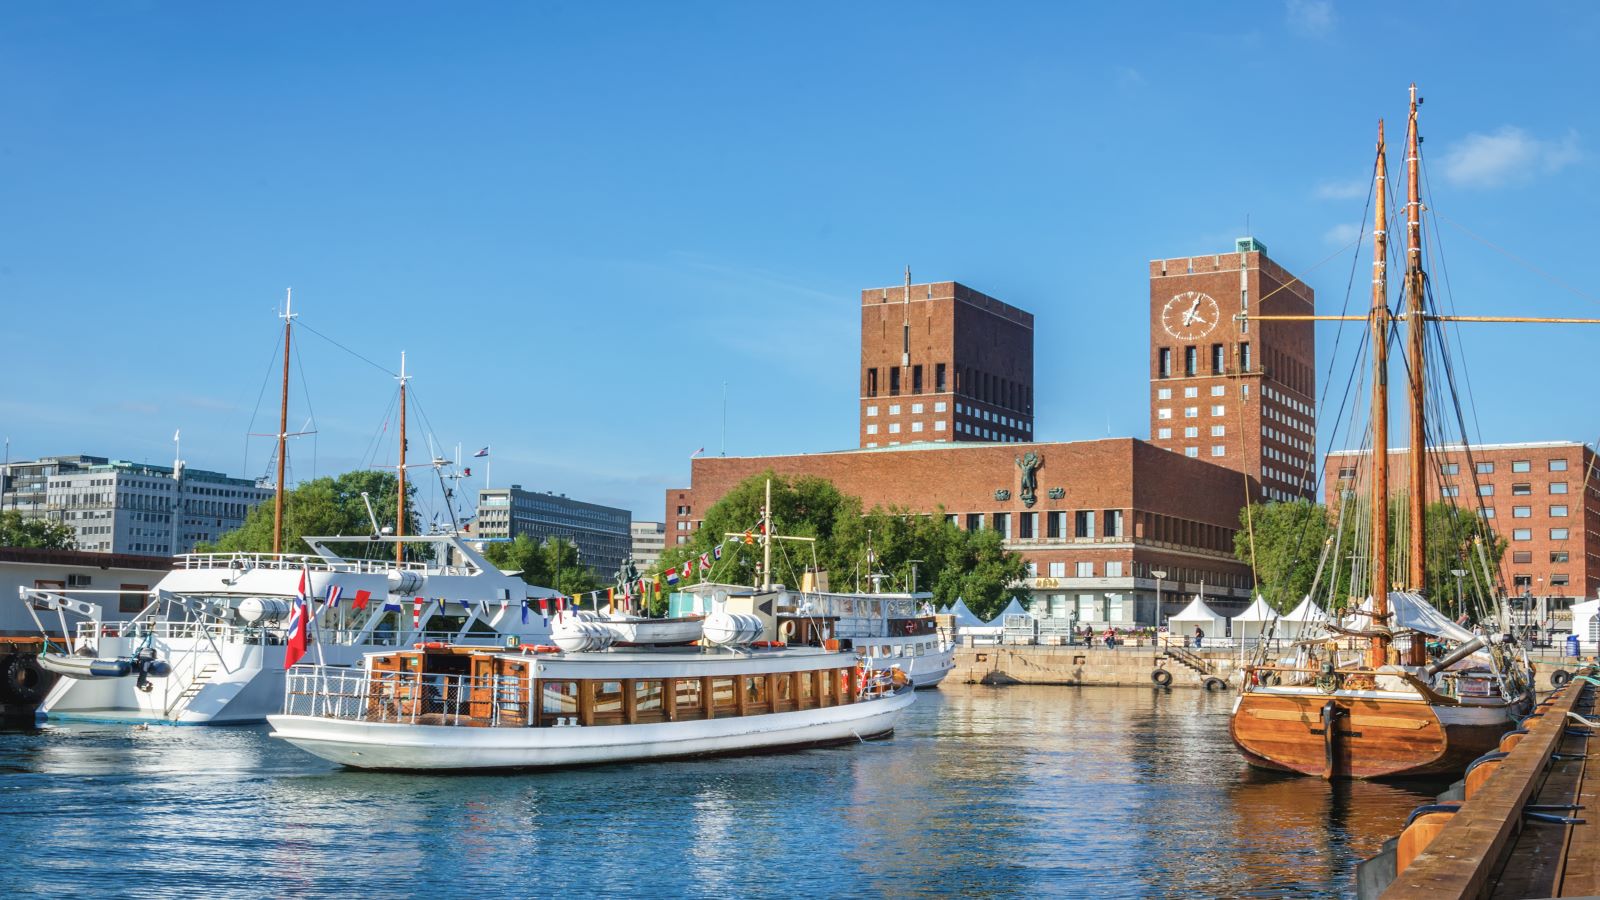 View of Oslo Radhuset town hall from the sea, Oslo, Norway